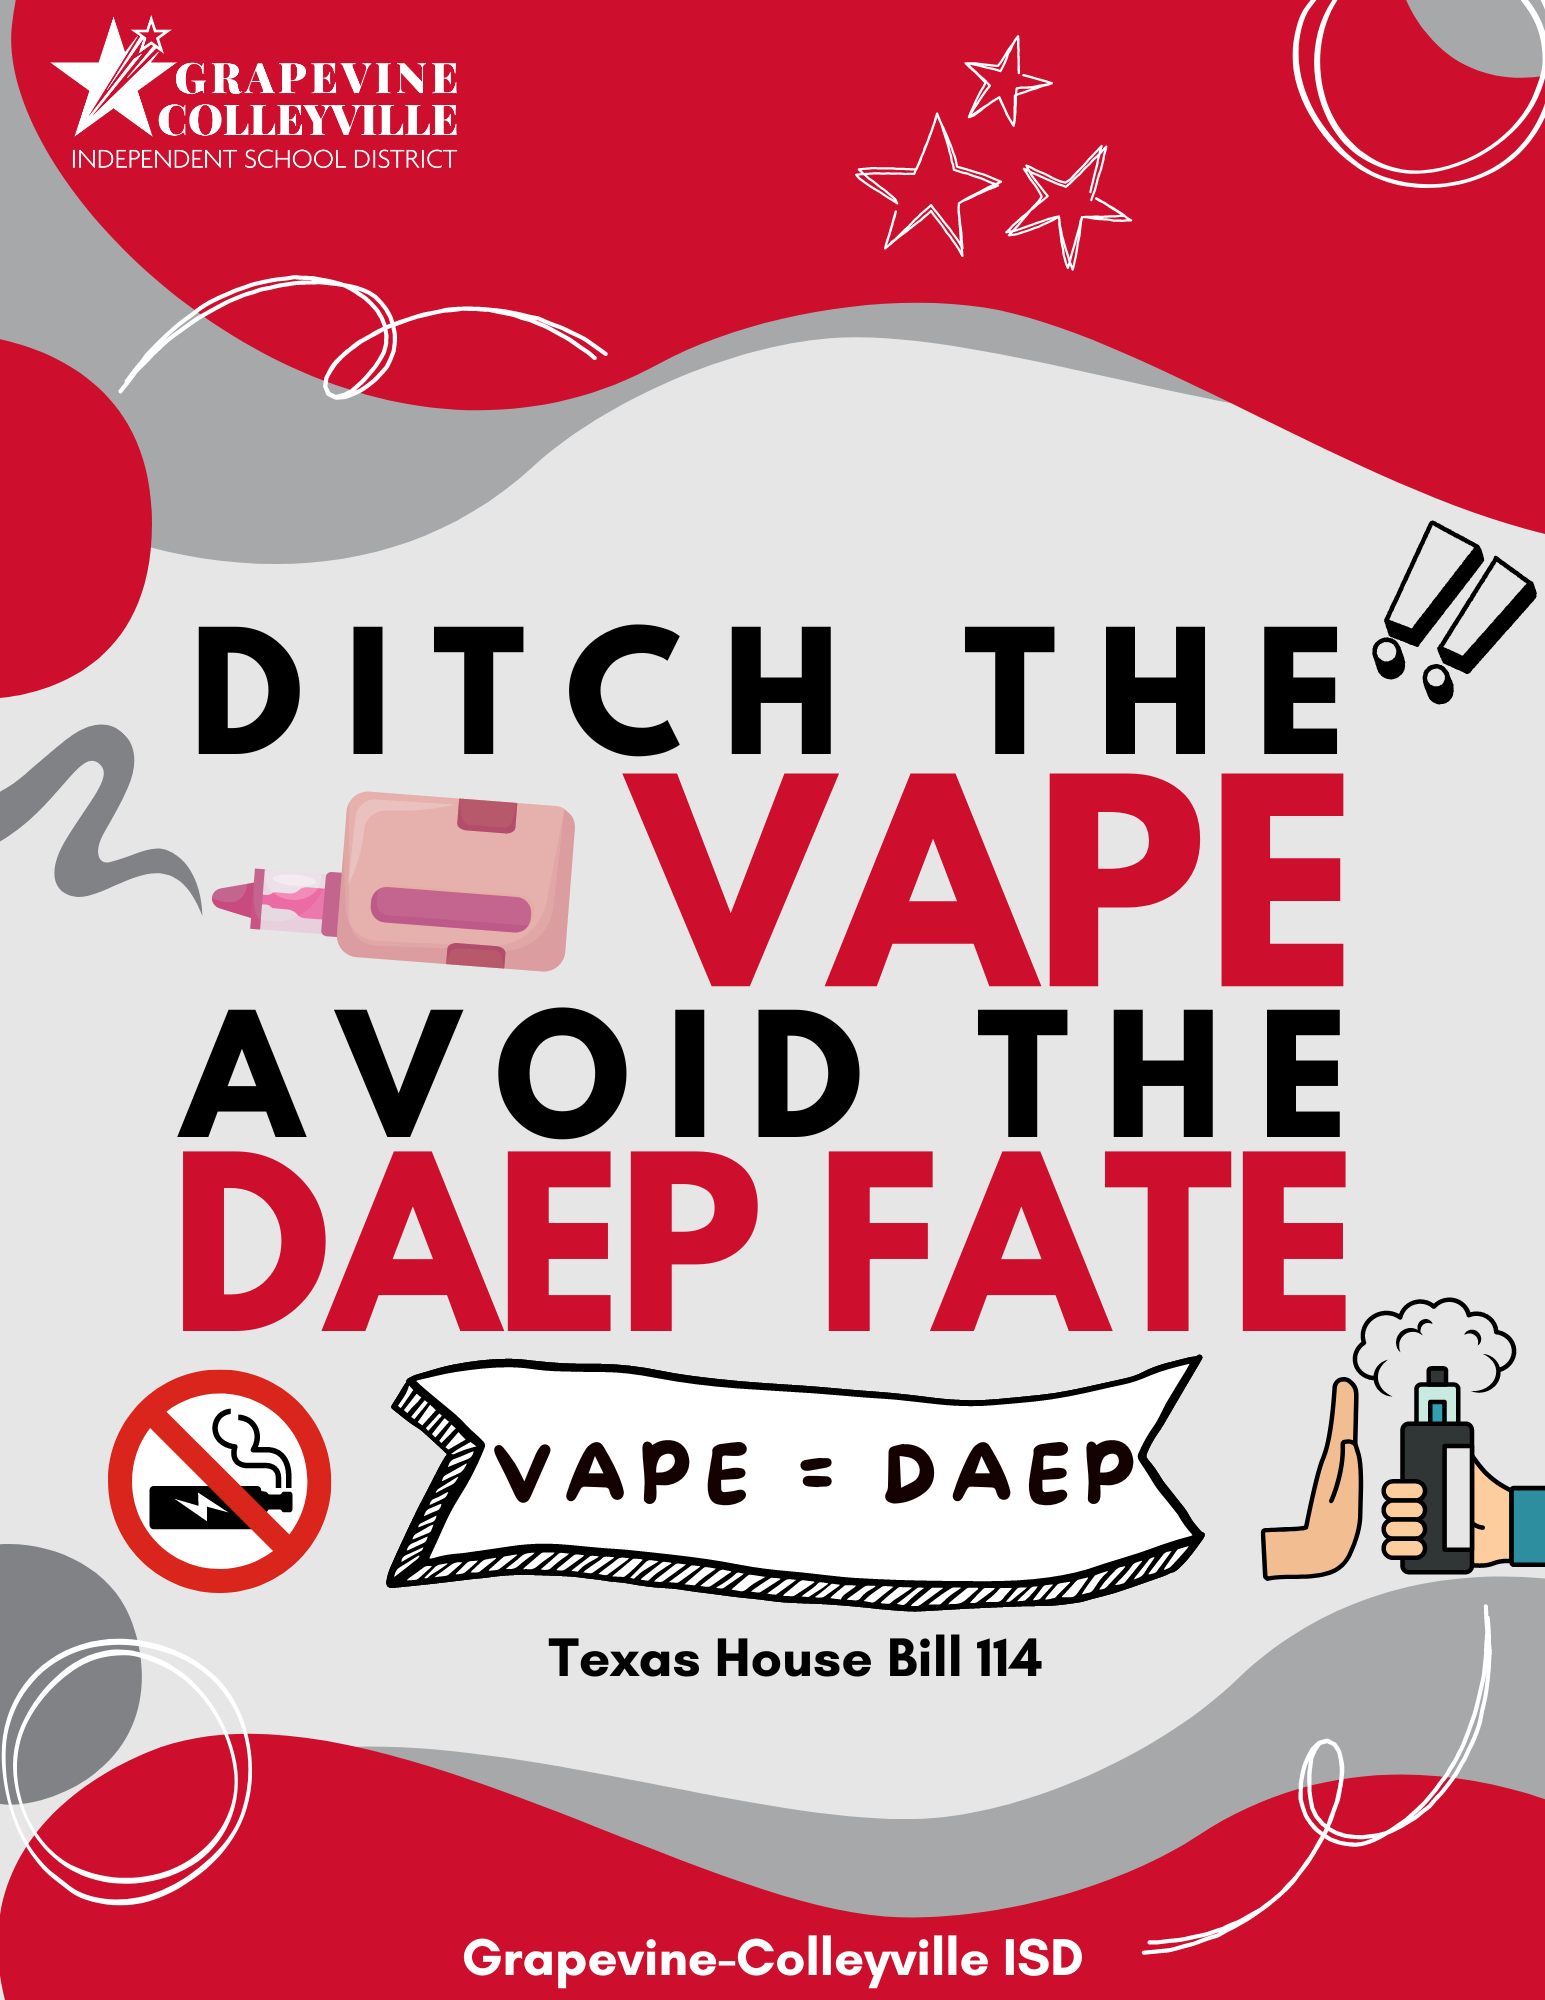 Ditch the vape. Avoid the DAEP fate.